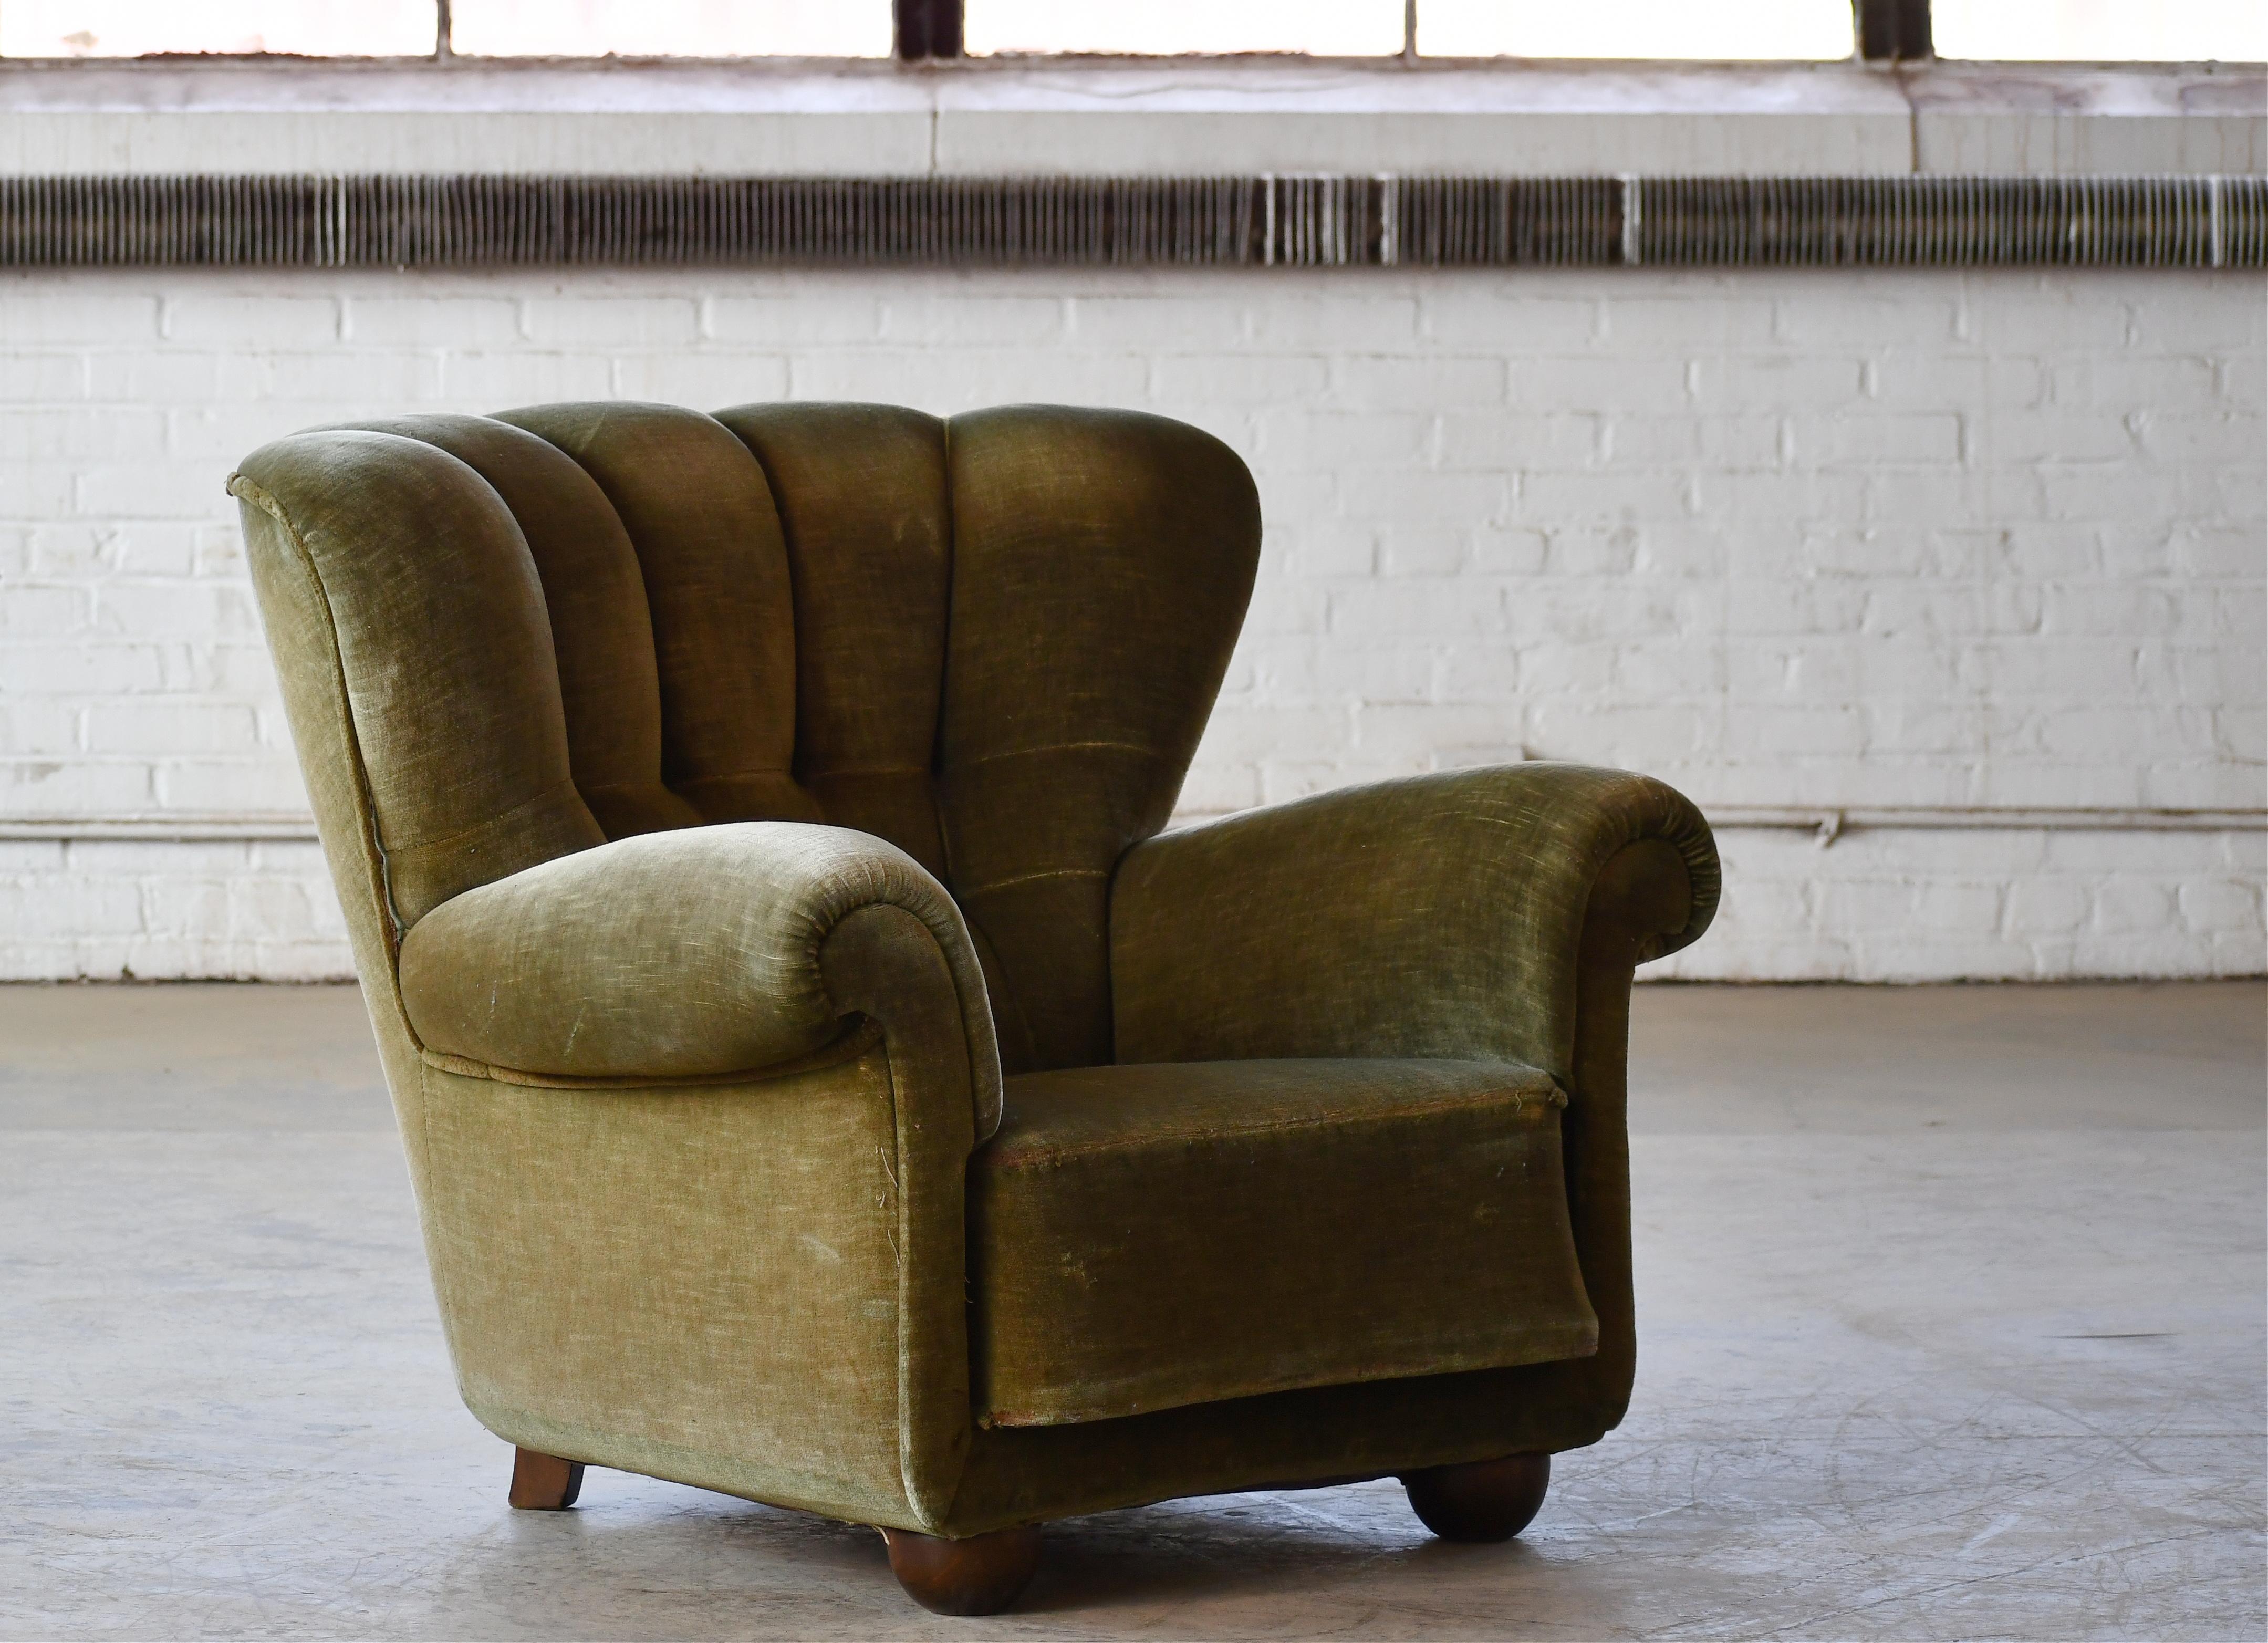 Danish Large Size Club Chair in Original mohair with Channeled Backrest, 1940's For Sale 1